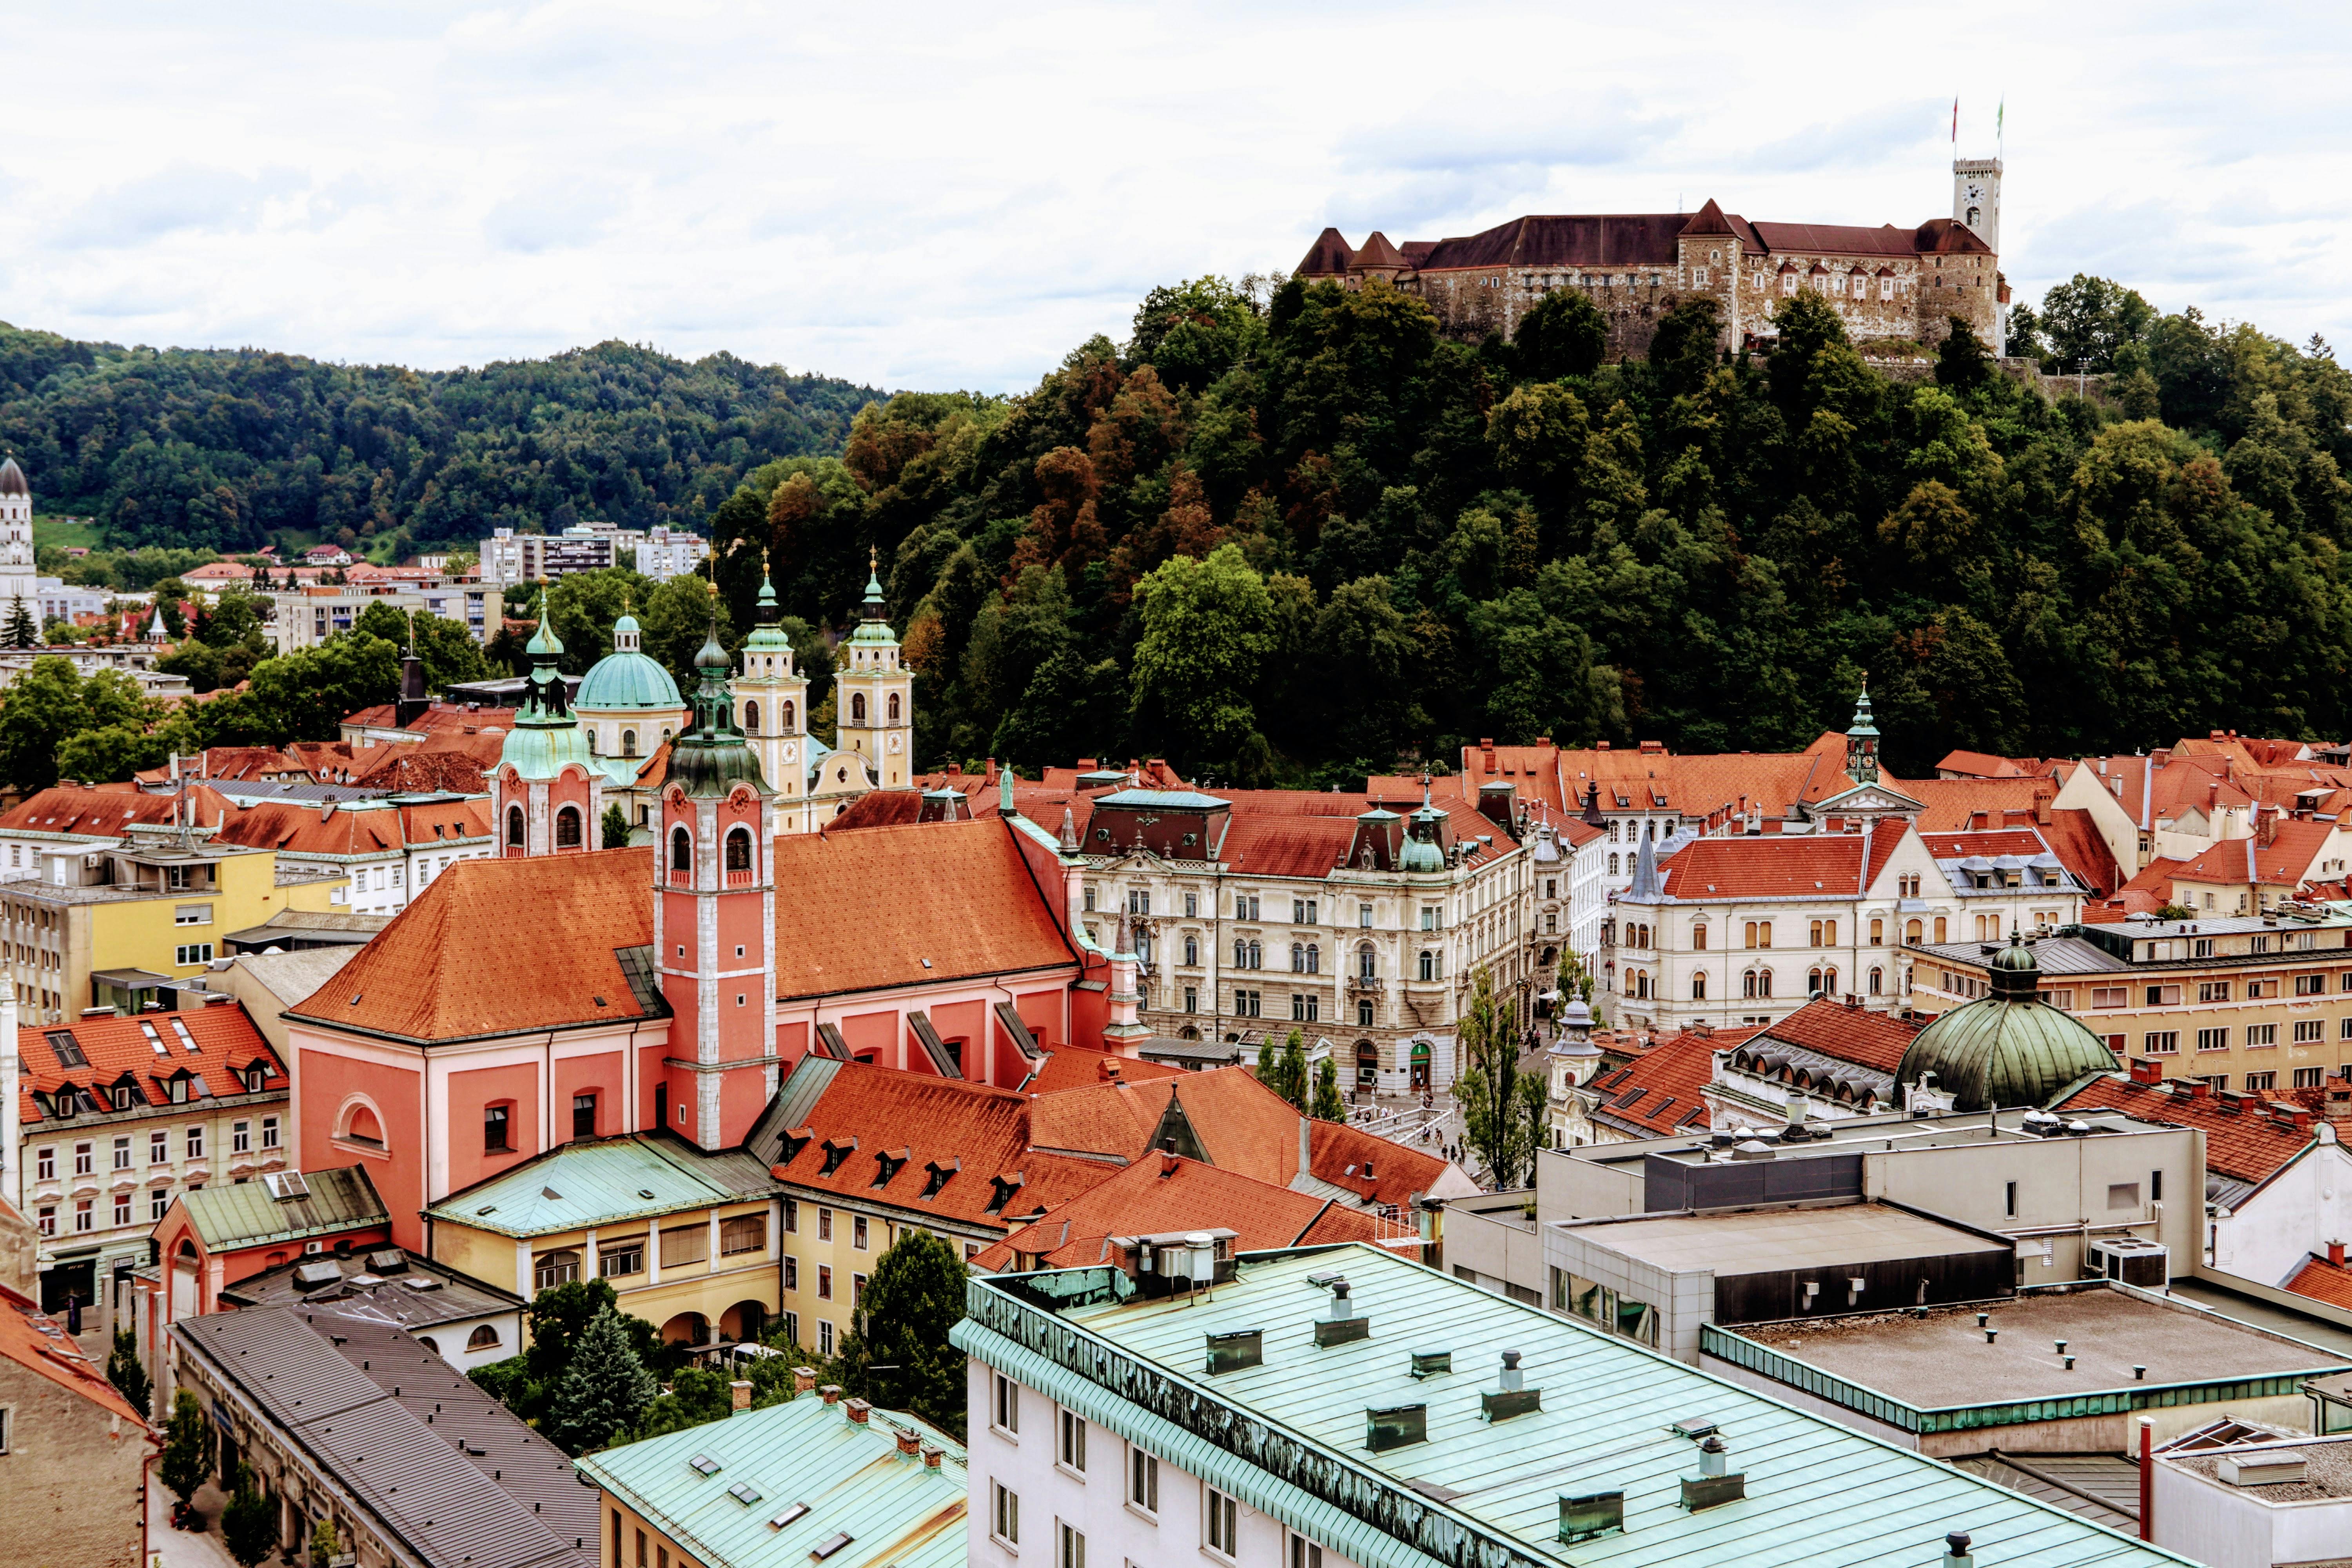 60 minutes walking tour in Ljubljana with a local